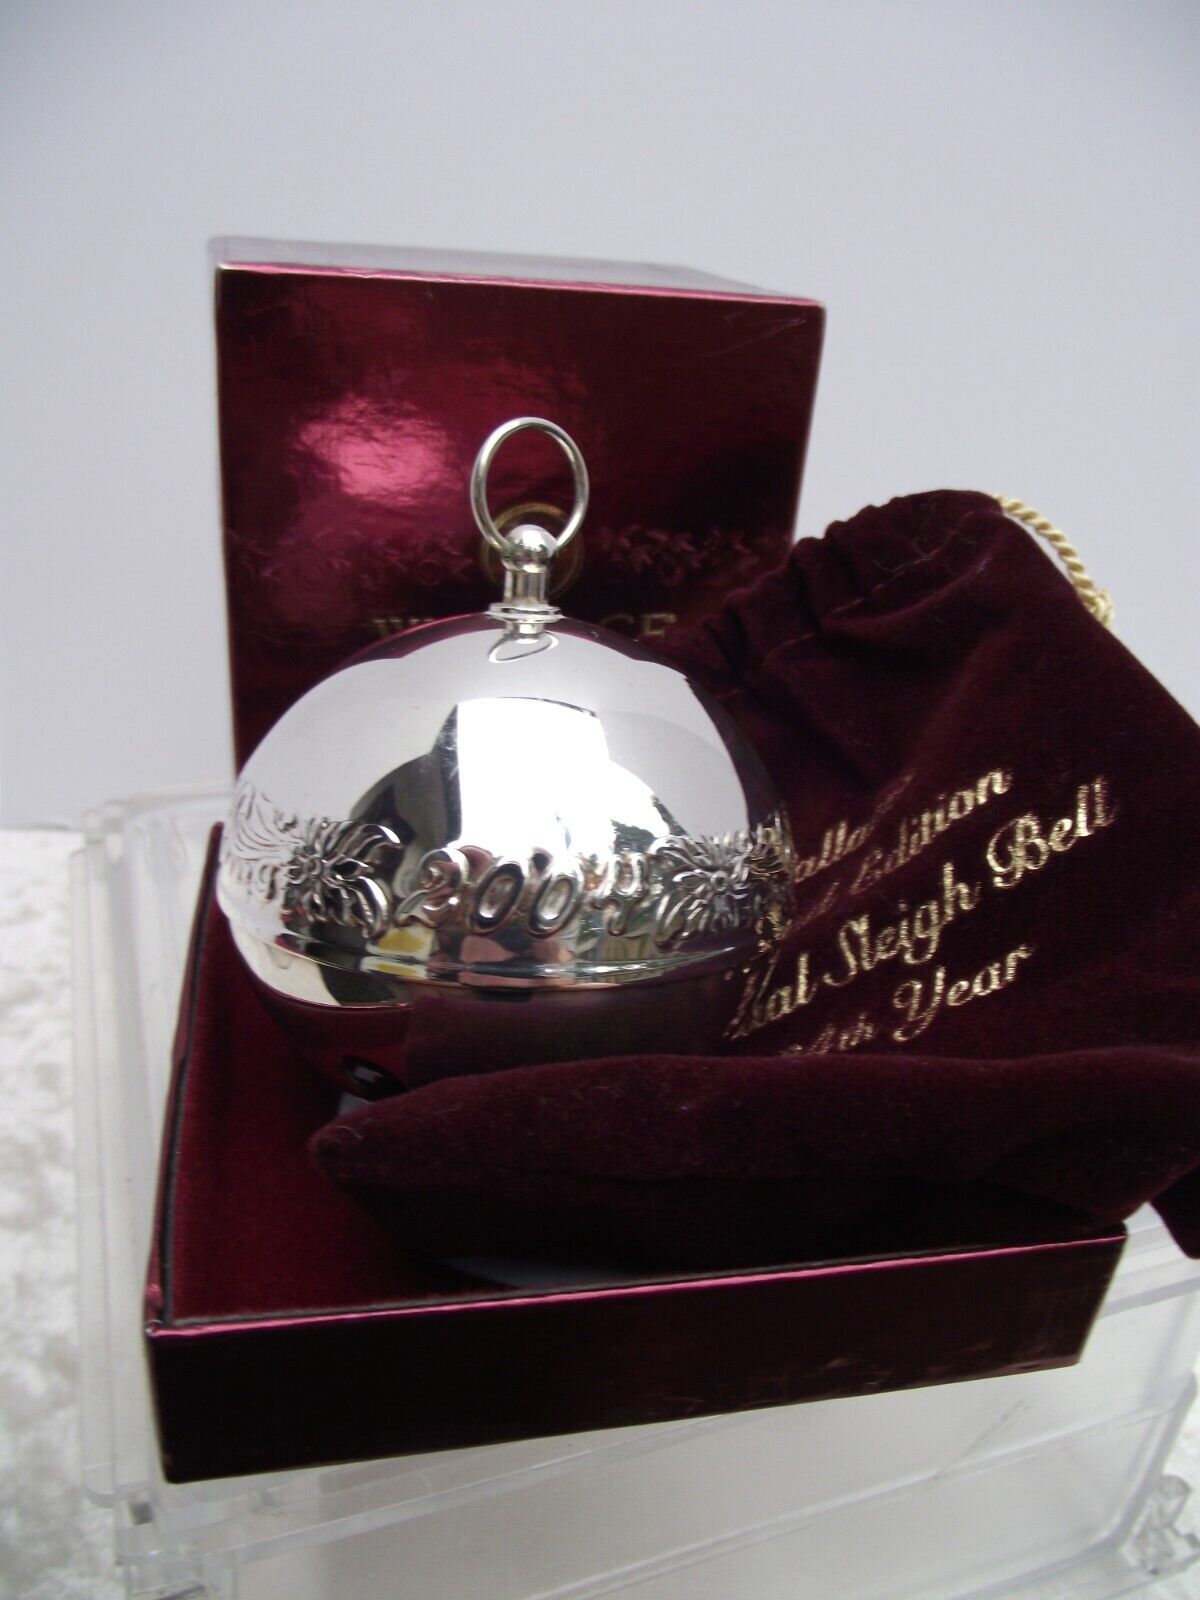 WALLACE LIMITED EDITION ANNUAL SLEIGH BELL 34th YEAR- 2004